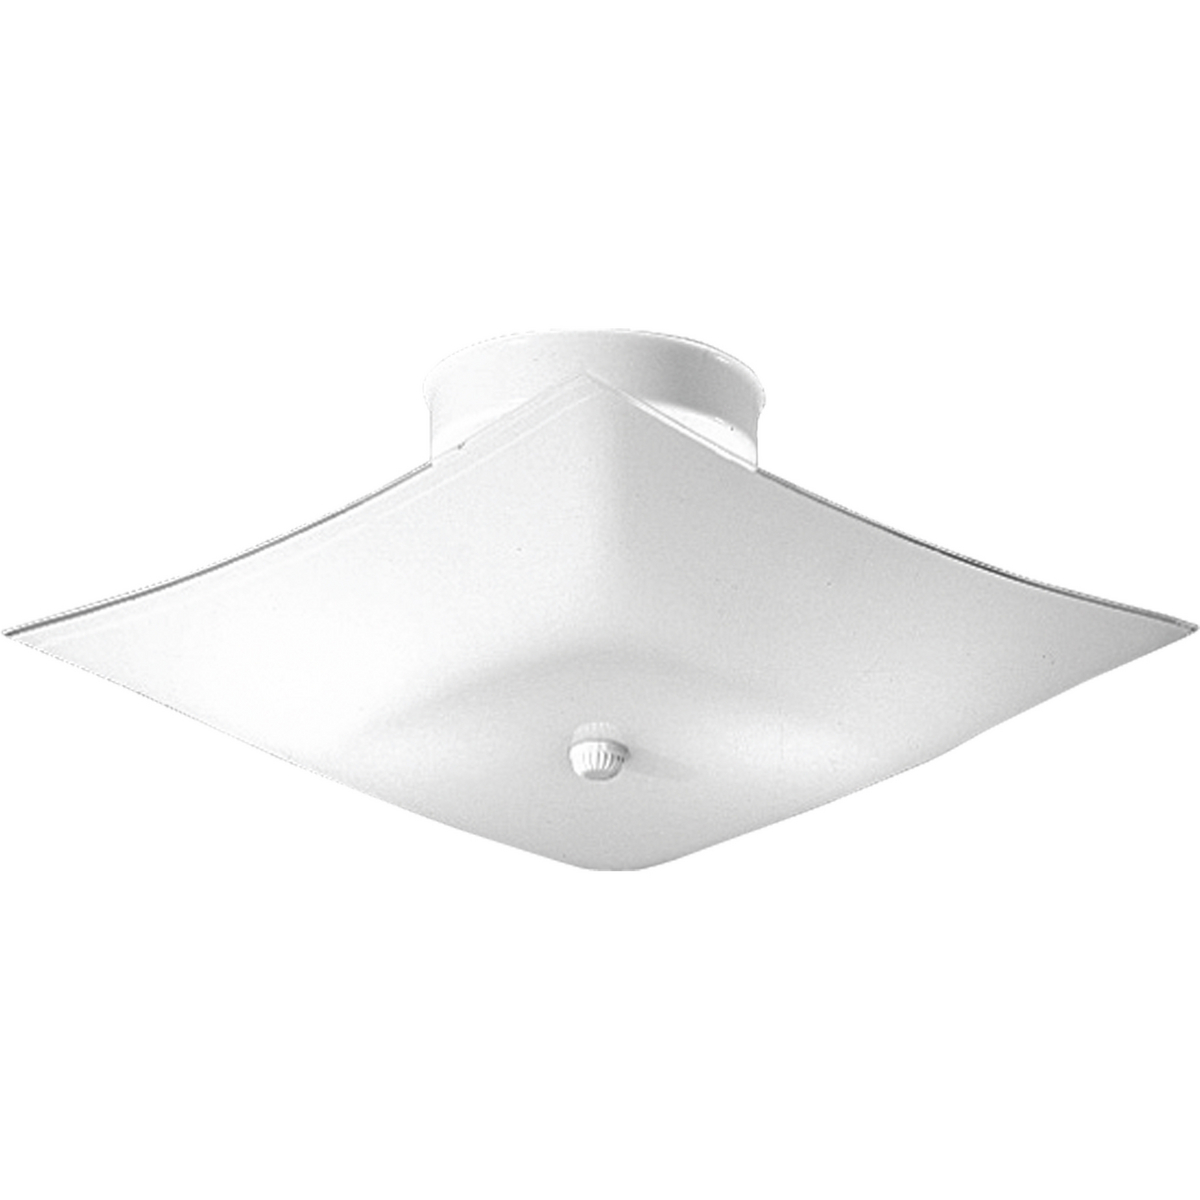 A modern close to ceiling fixture with a square white glass shade in a white finish. The fixture is ideal in either a bathroom or bedroom setting.